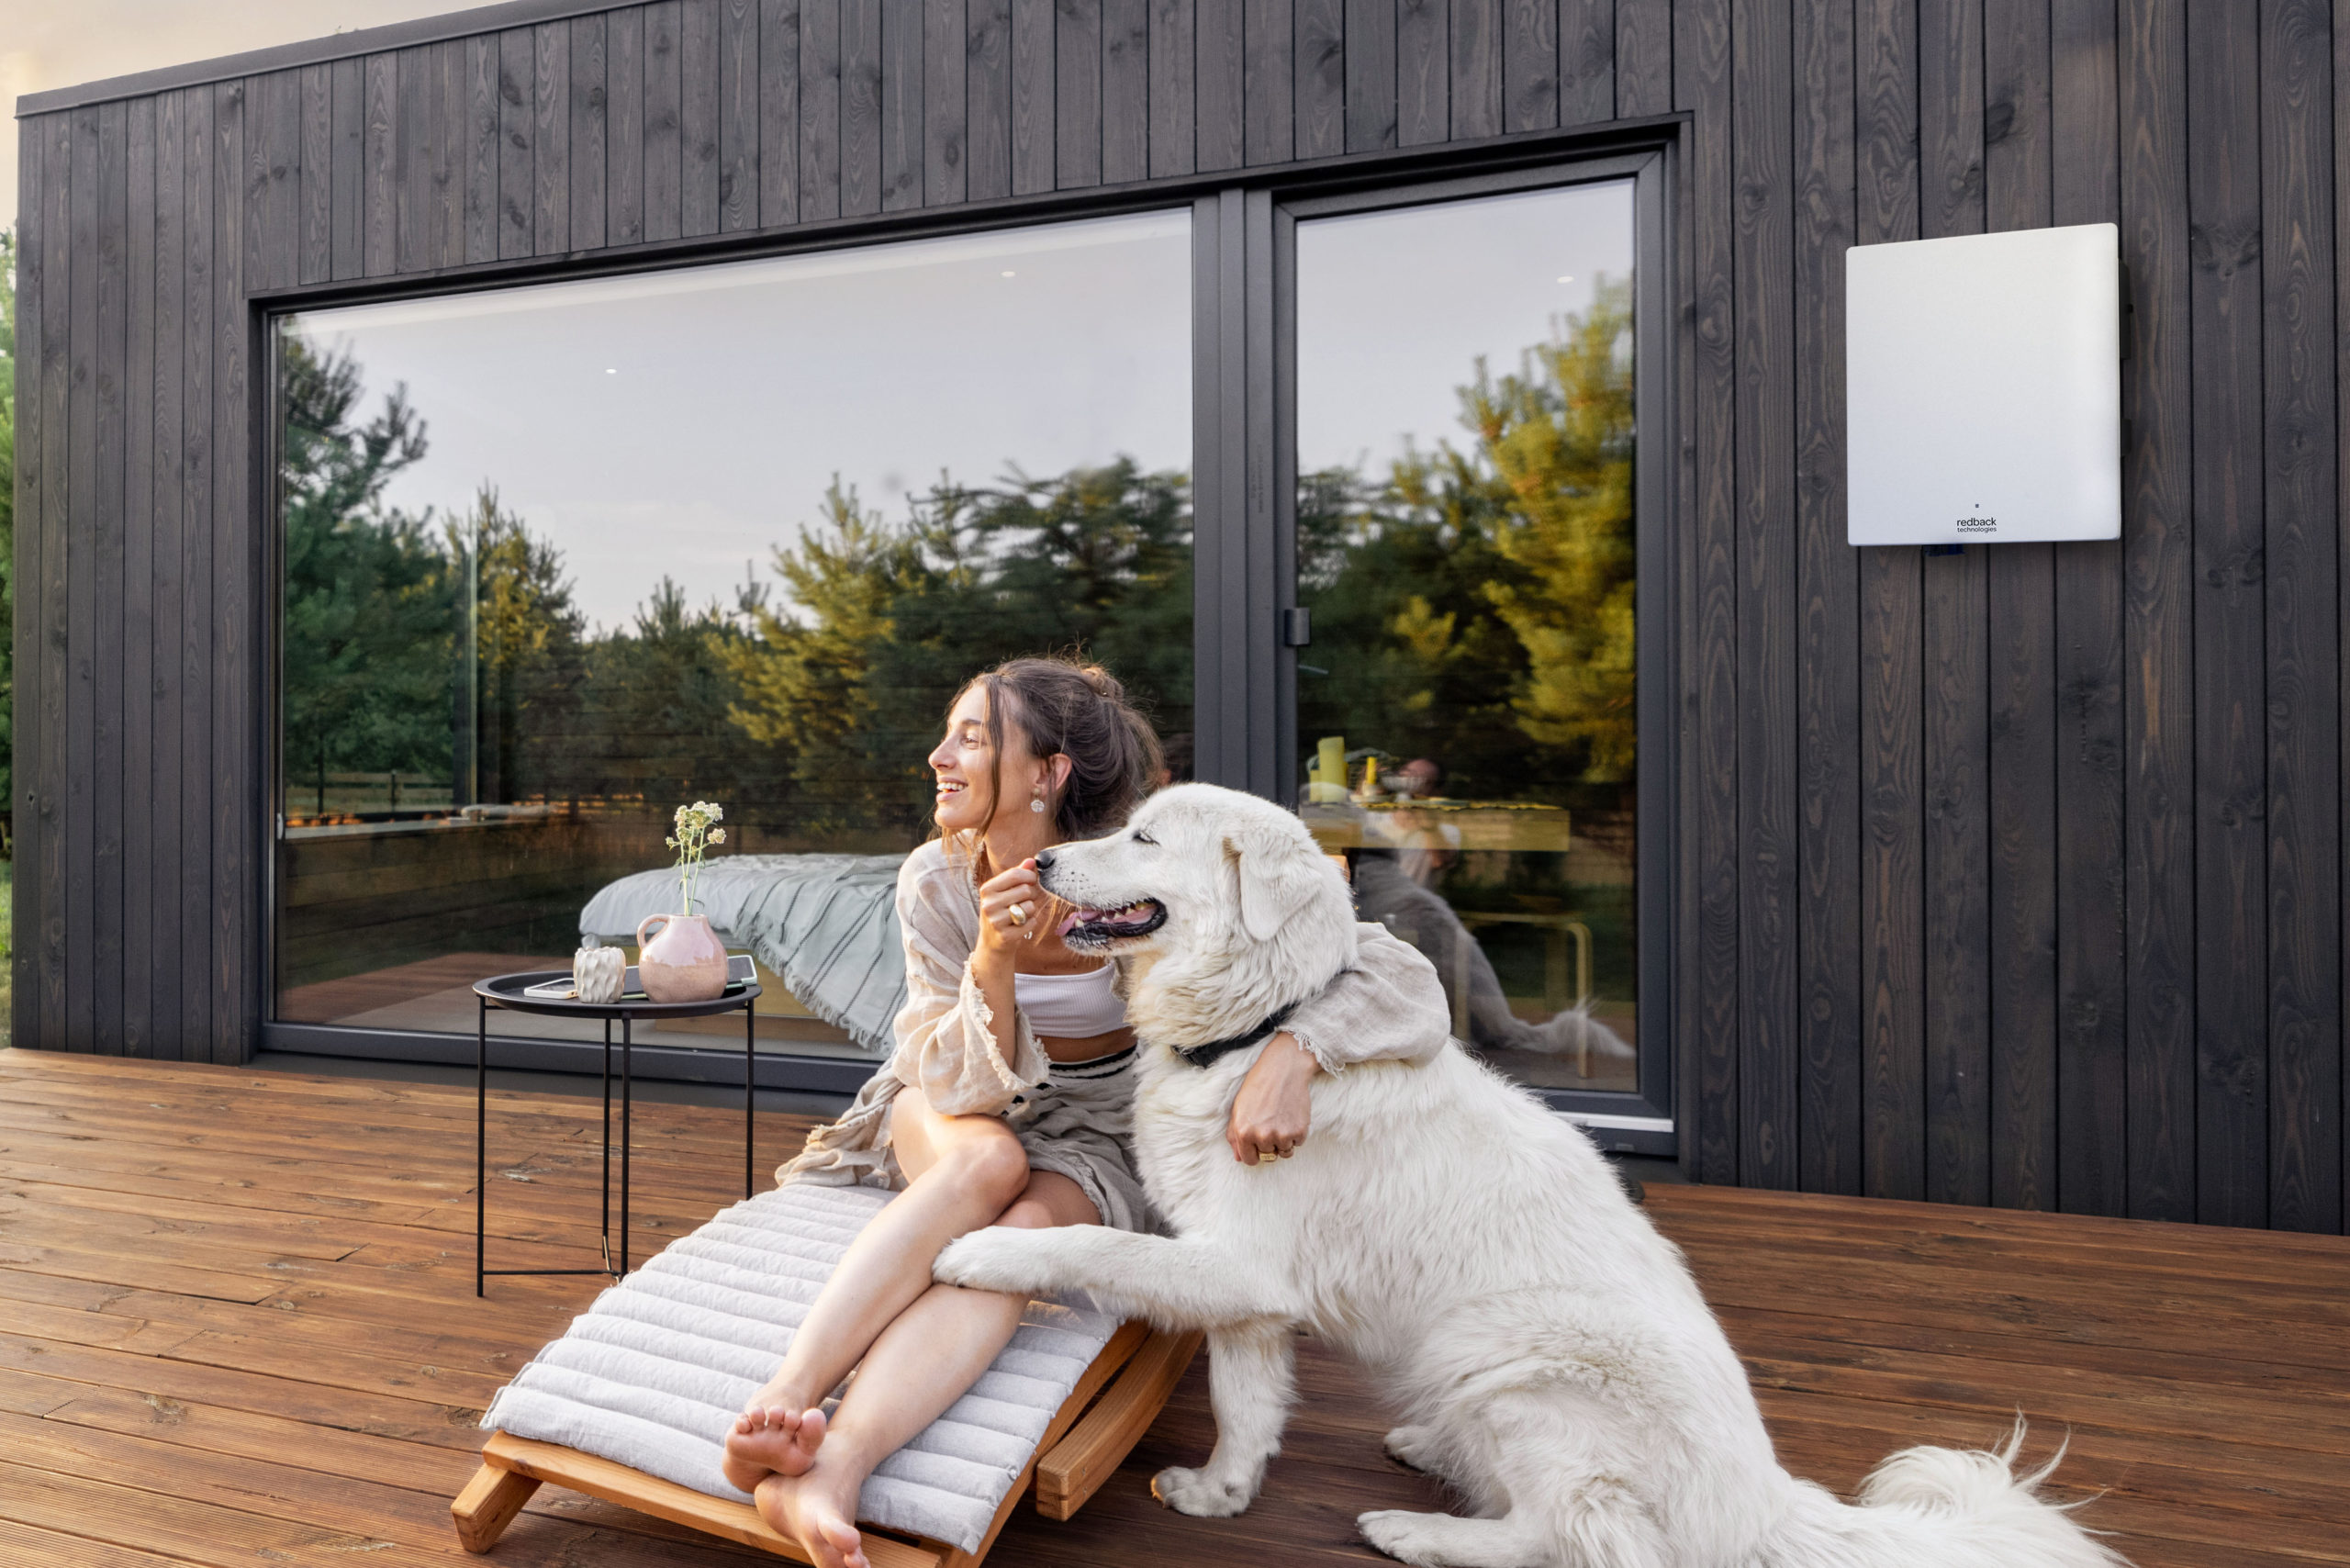 Redback Solar Smart Inverter shown on a wall with a young woman looking at the sky with her dog